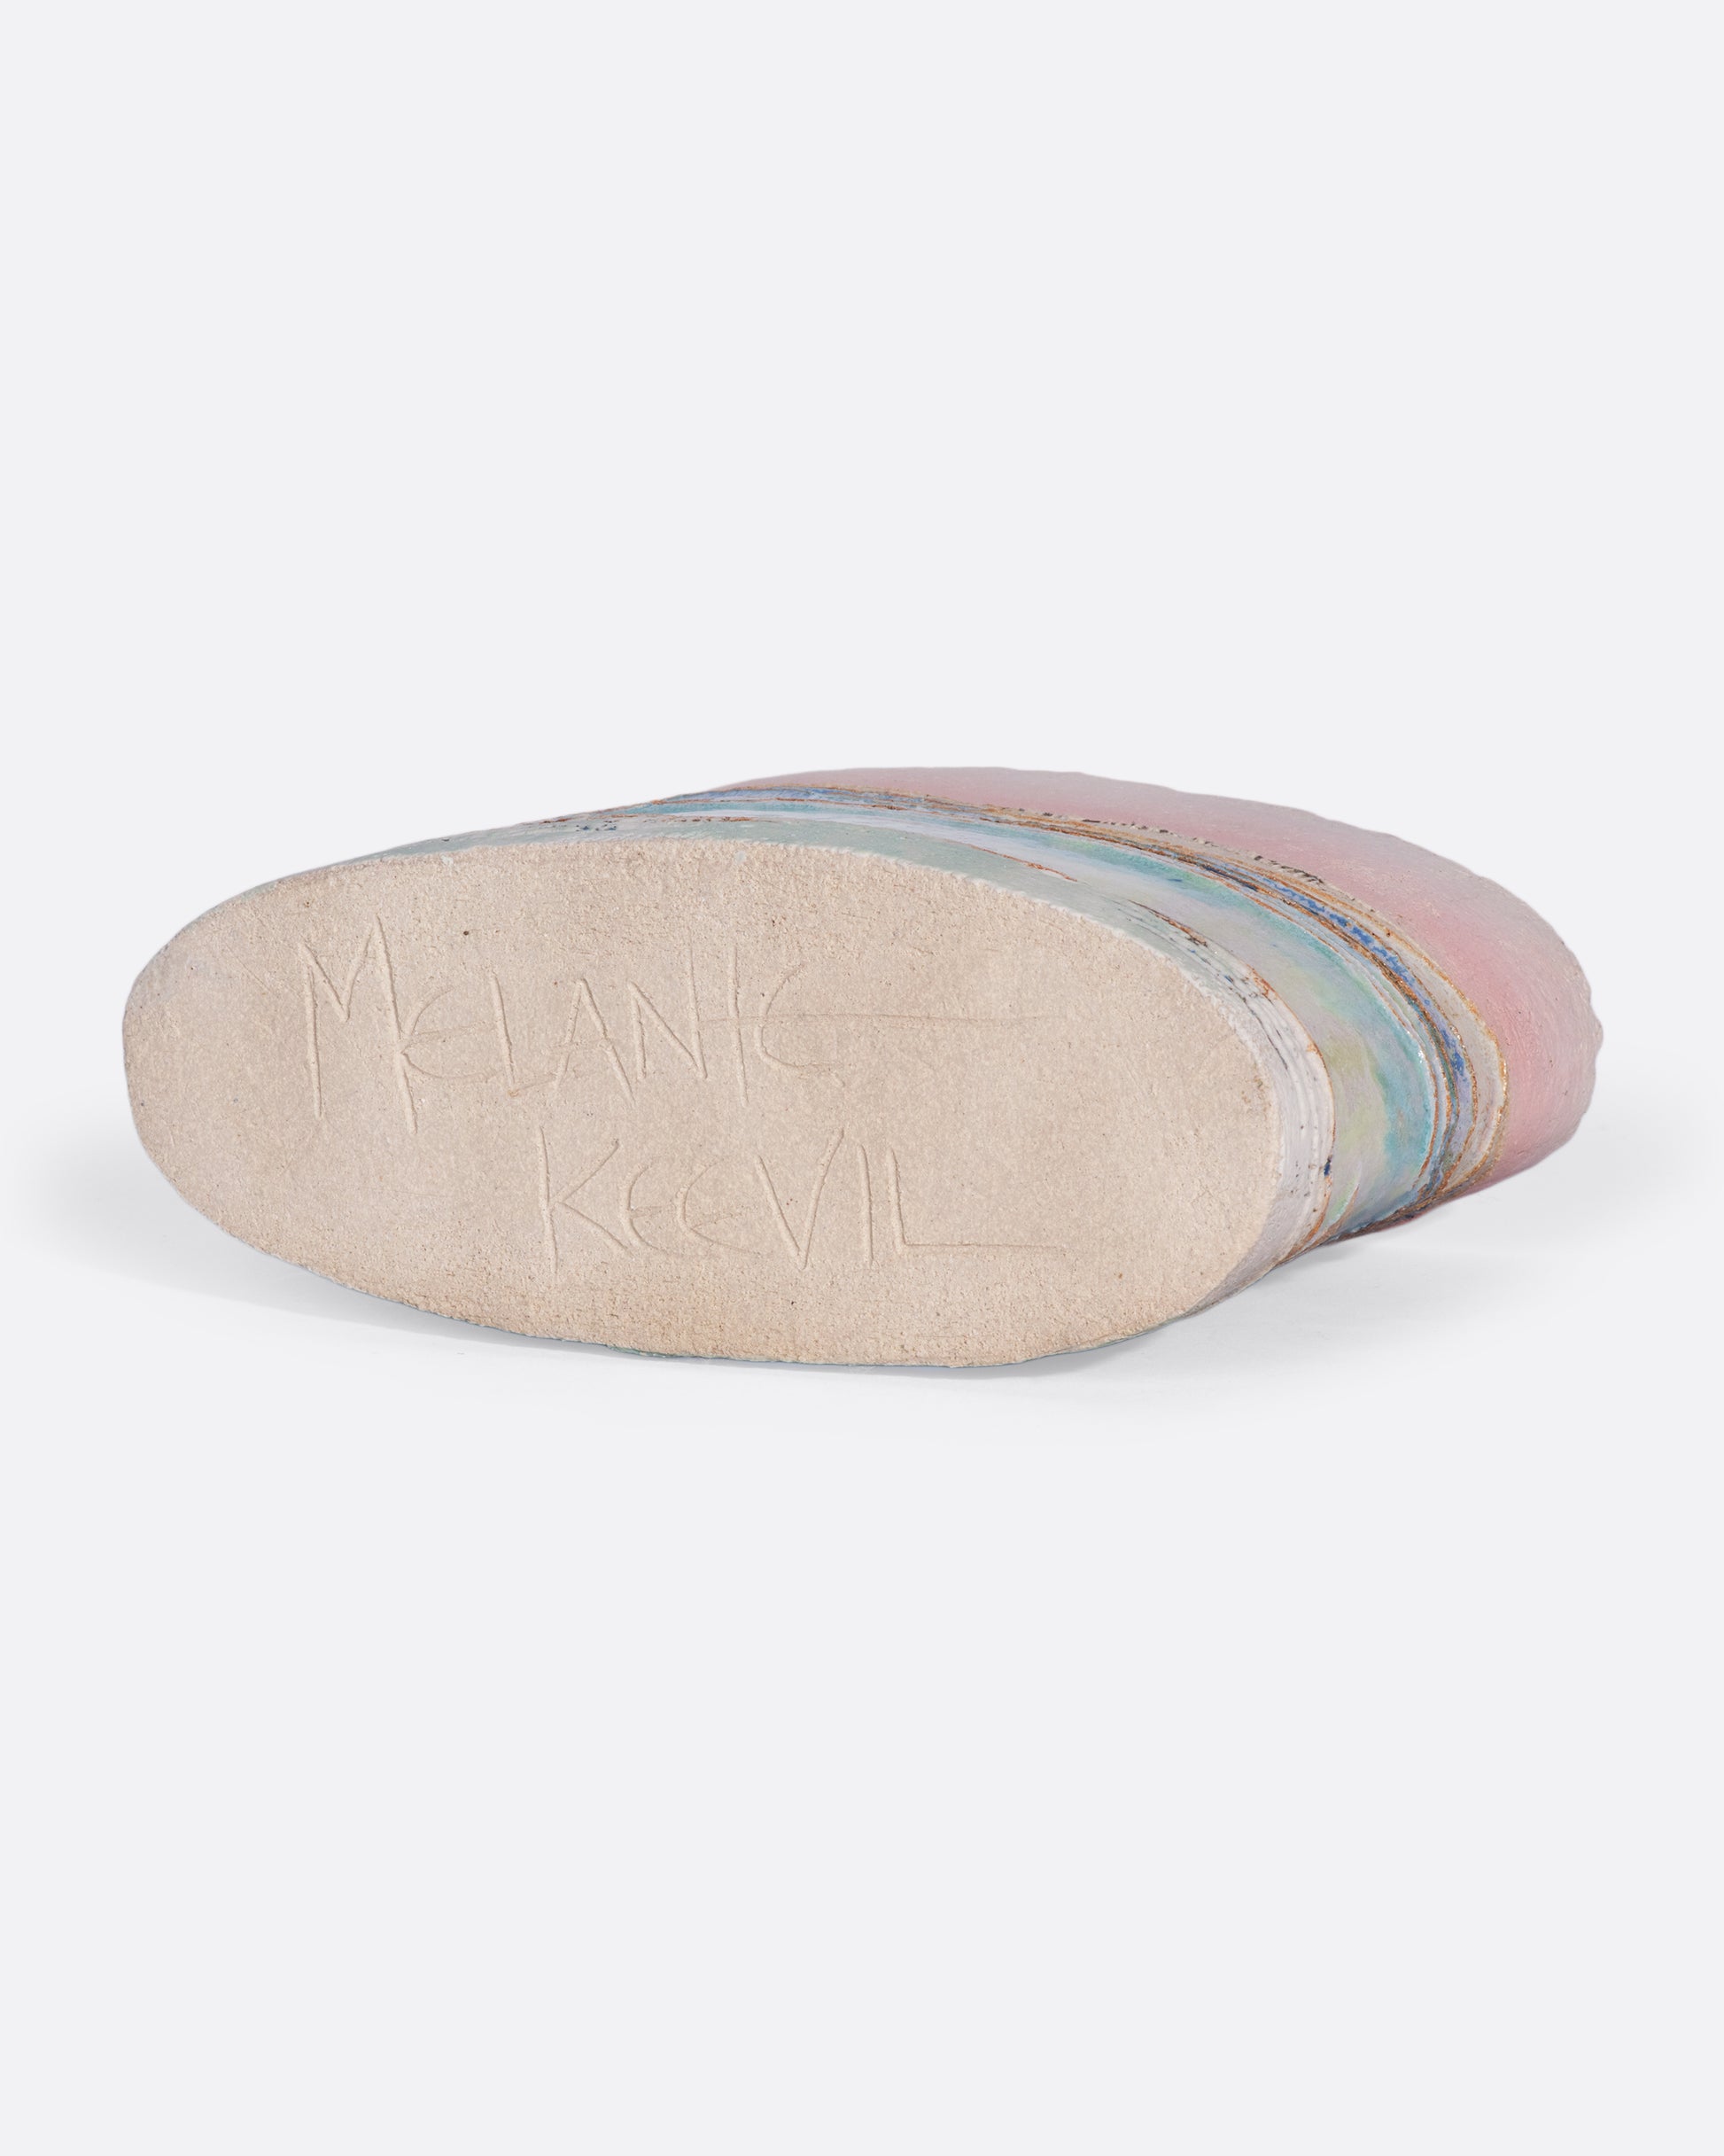 This ceramic vessel is meticulously handmade with many layers of glaze atop stoneware clay, creating a rich, varied texture. The landscape feels like you're gazing across a lake, watching clouds pass and reflect on its surface